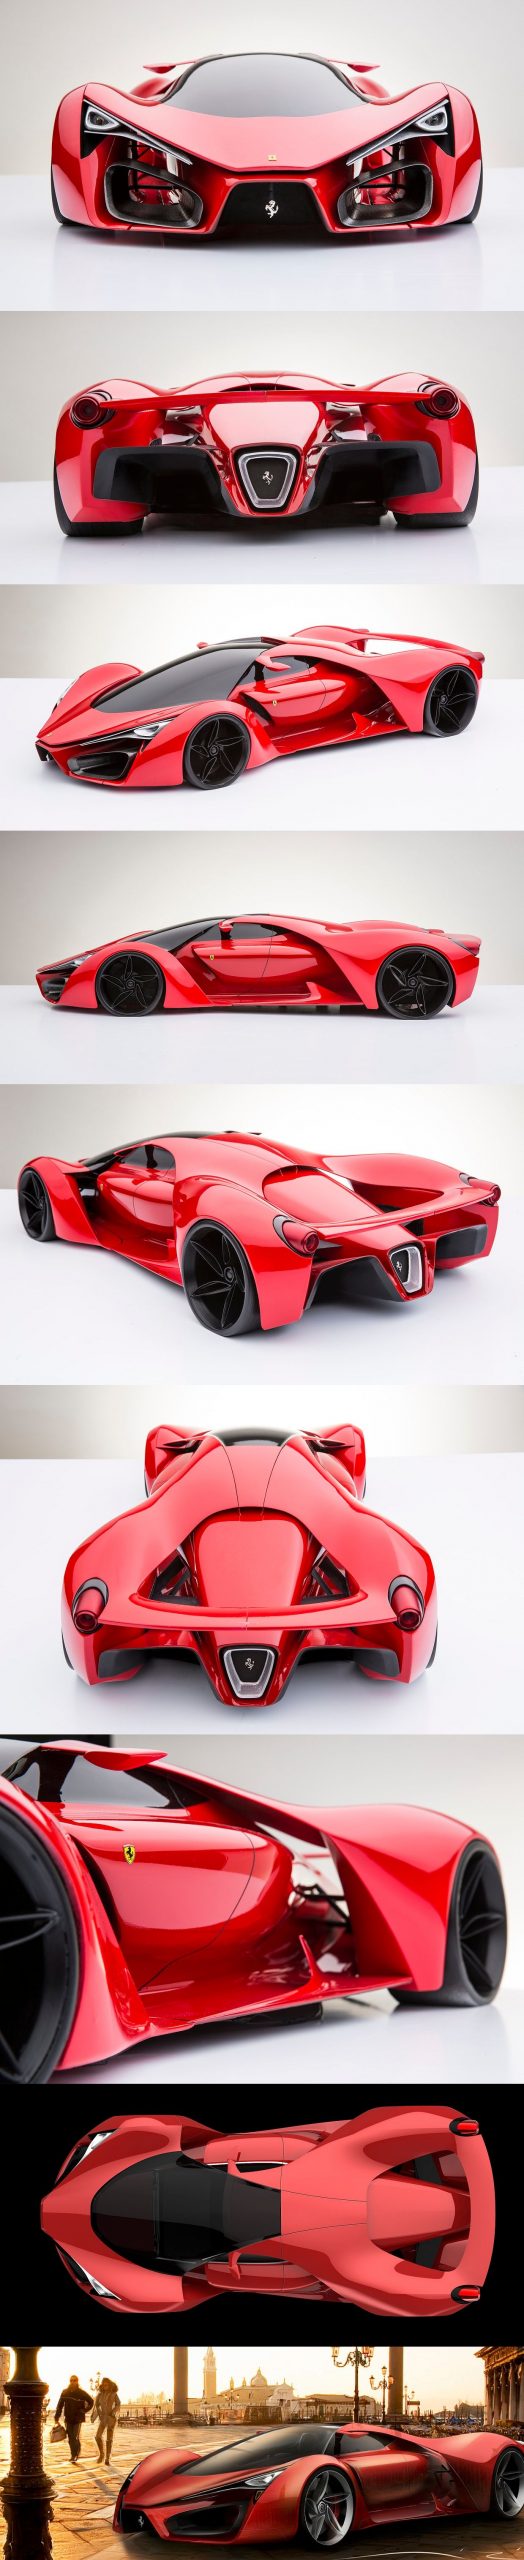 From car mechanic to Millionaire. BE ready Ferrari F80 Supercar Concept